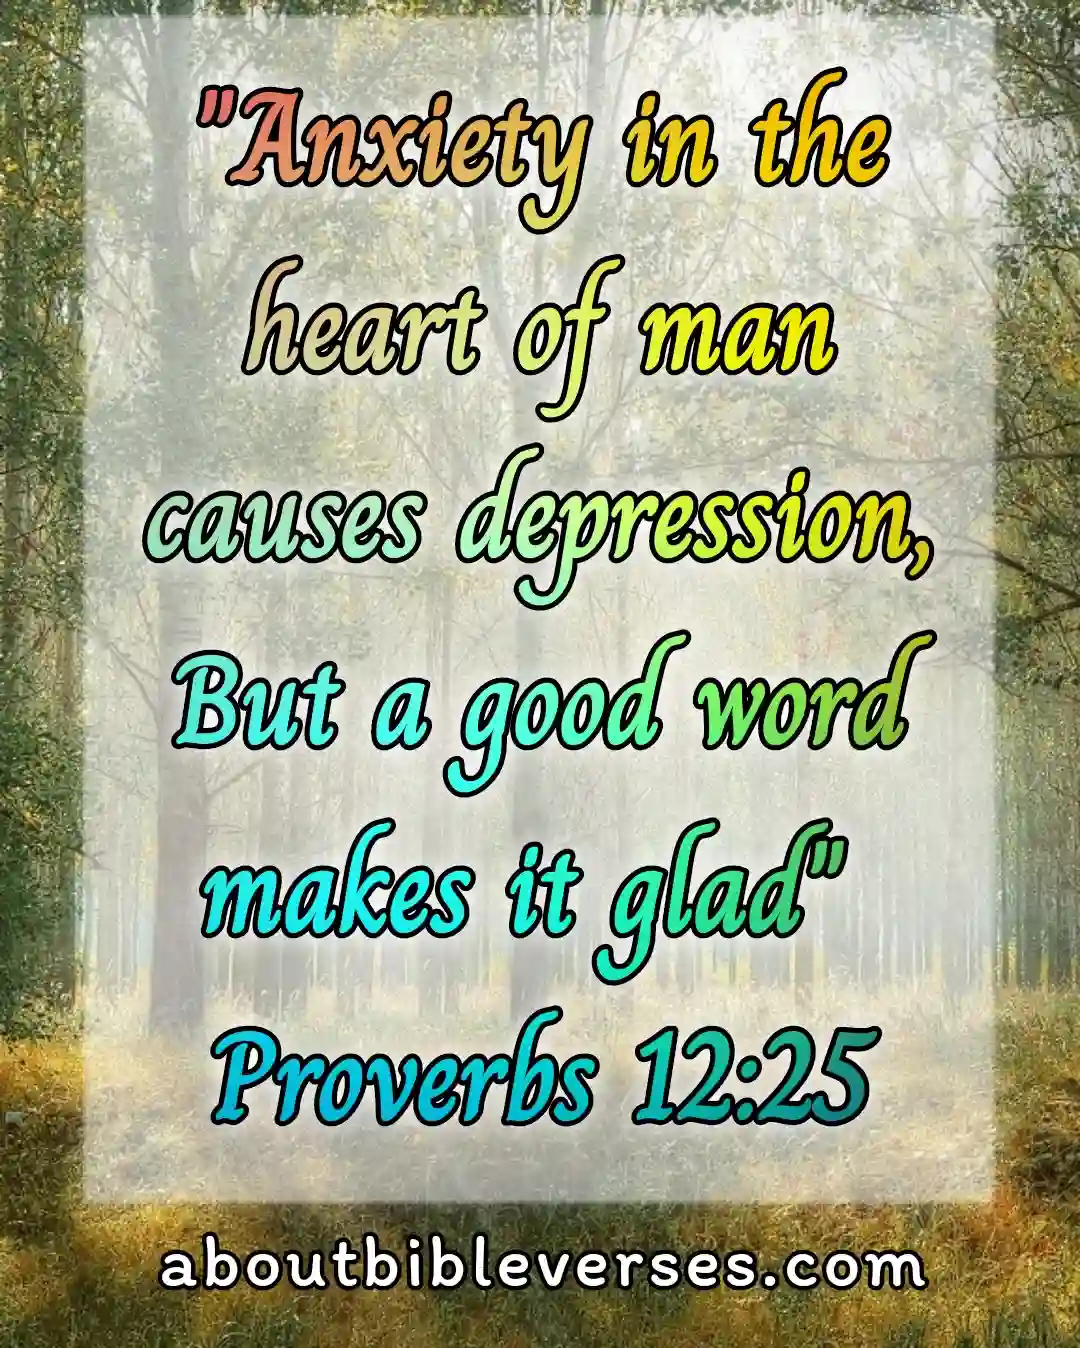 Bible Verses About Health And Wellness (Proverbs 12:25)